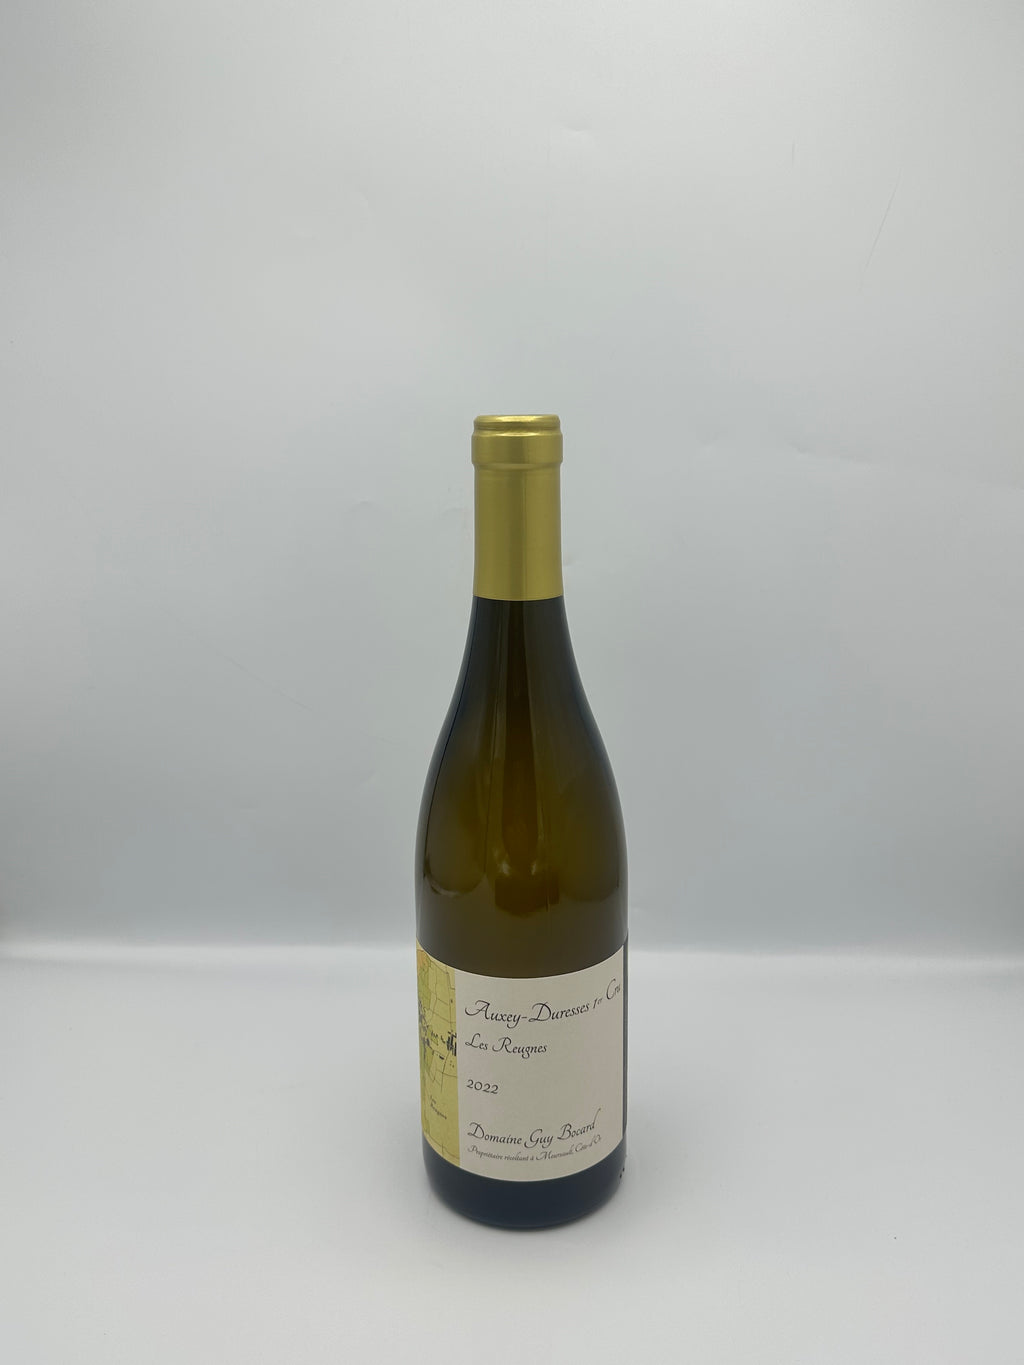 Auxey Duresses 1er Cru 2022 Blanc - Domaine Guy Bocard